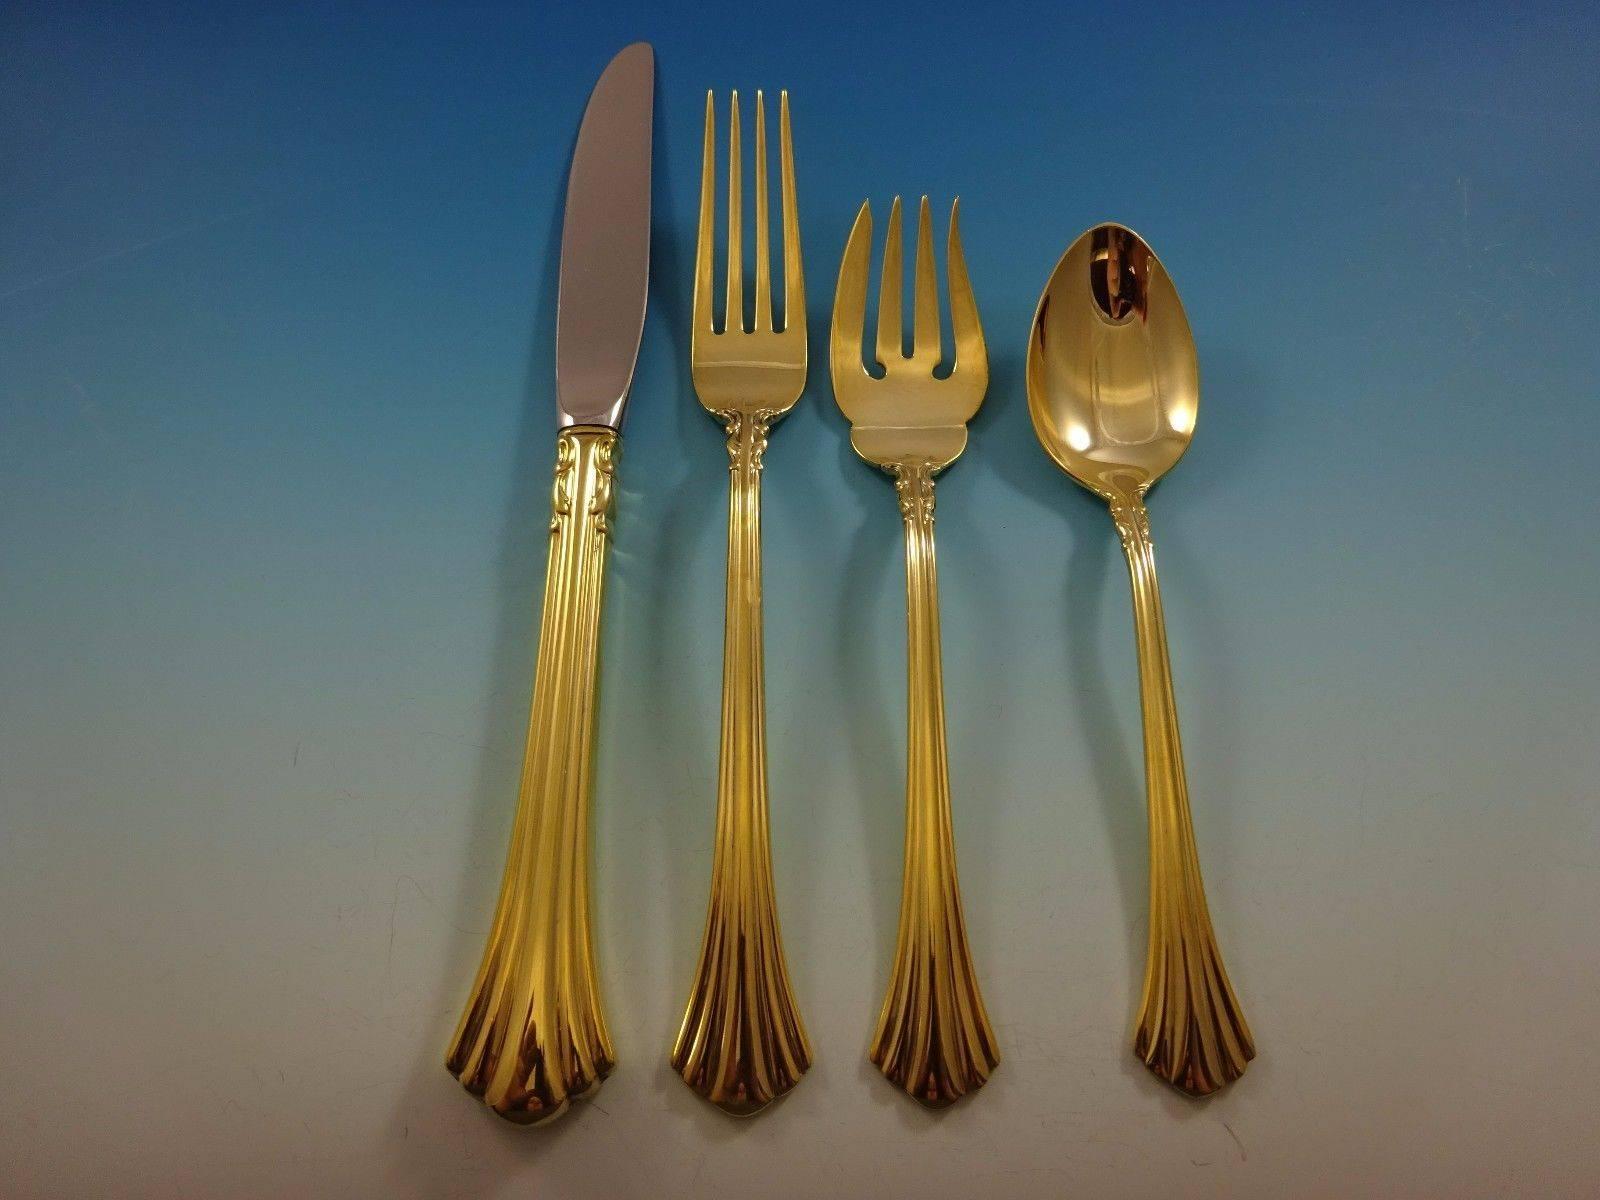 18th century gold by Reed & Barton sterling silver flatware set, 32 pieces. Gold flatware is on trend and makes a bold statement on your table. This set is vermeil (completely gold-washed) and includes: Eight knives, 9